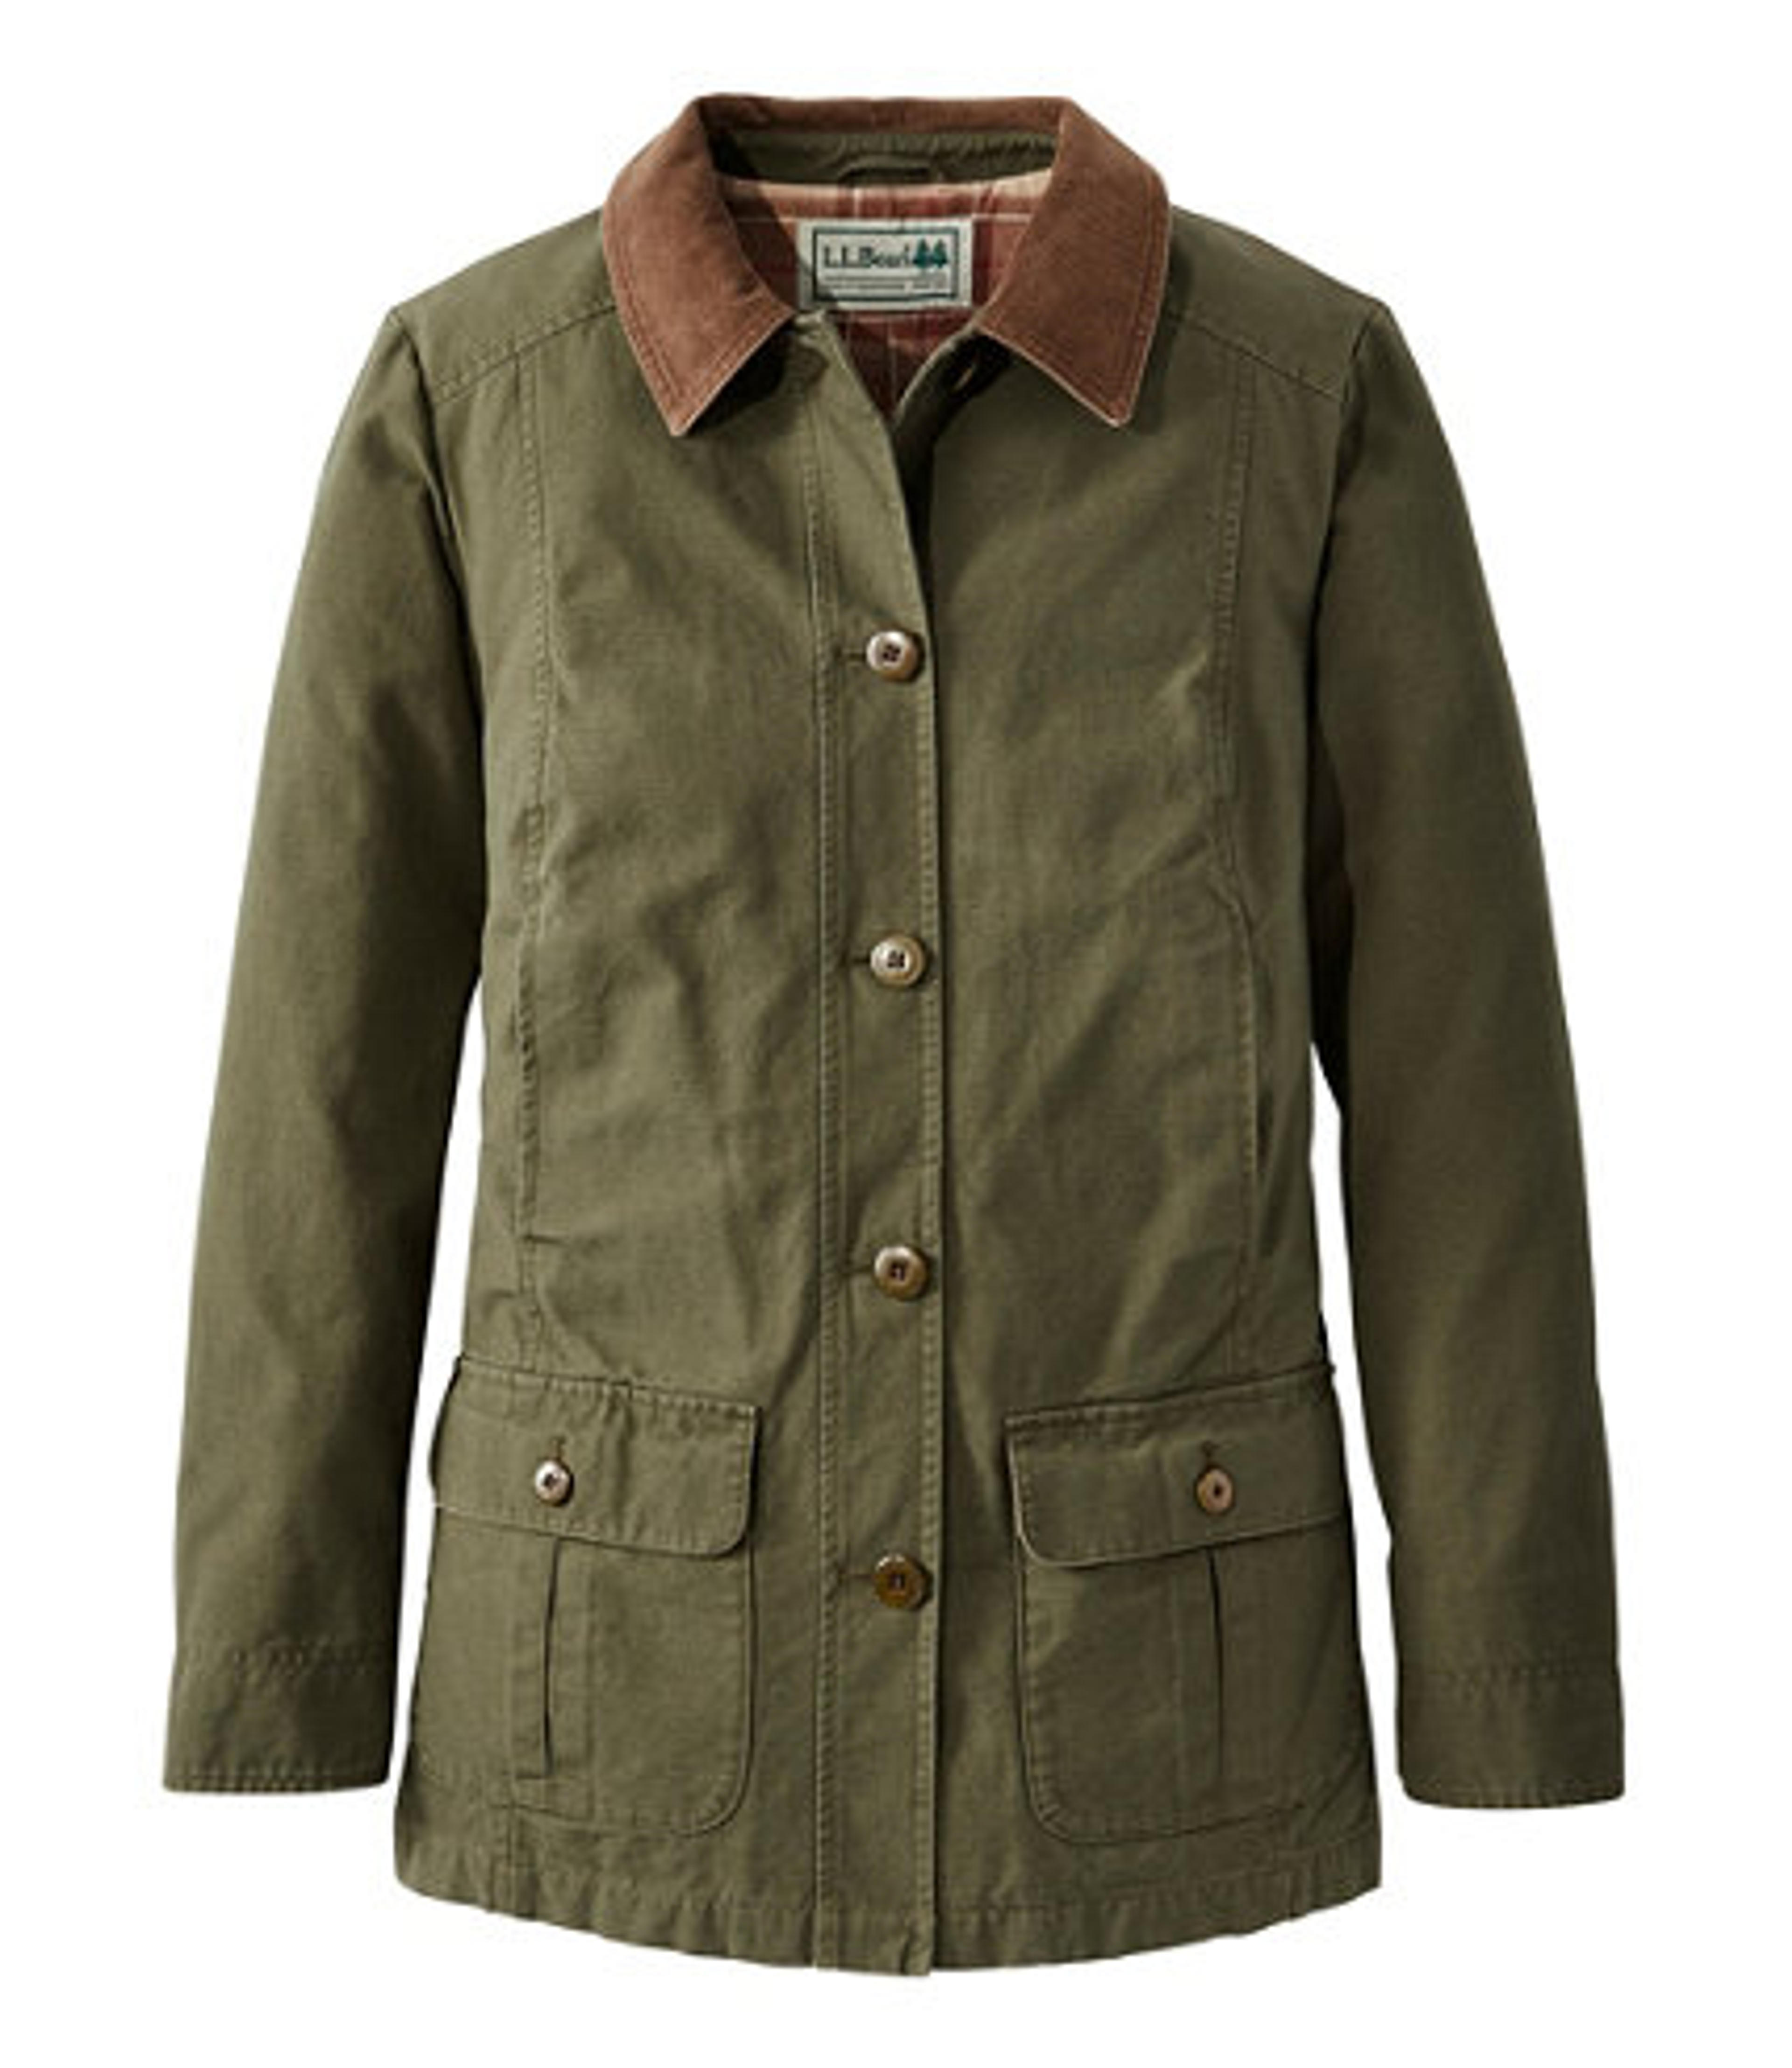 Women's Adirondack Barn Coat, Flannel-Lined | Casual Jackets at L.L.Bean